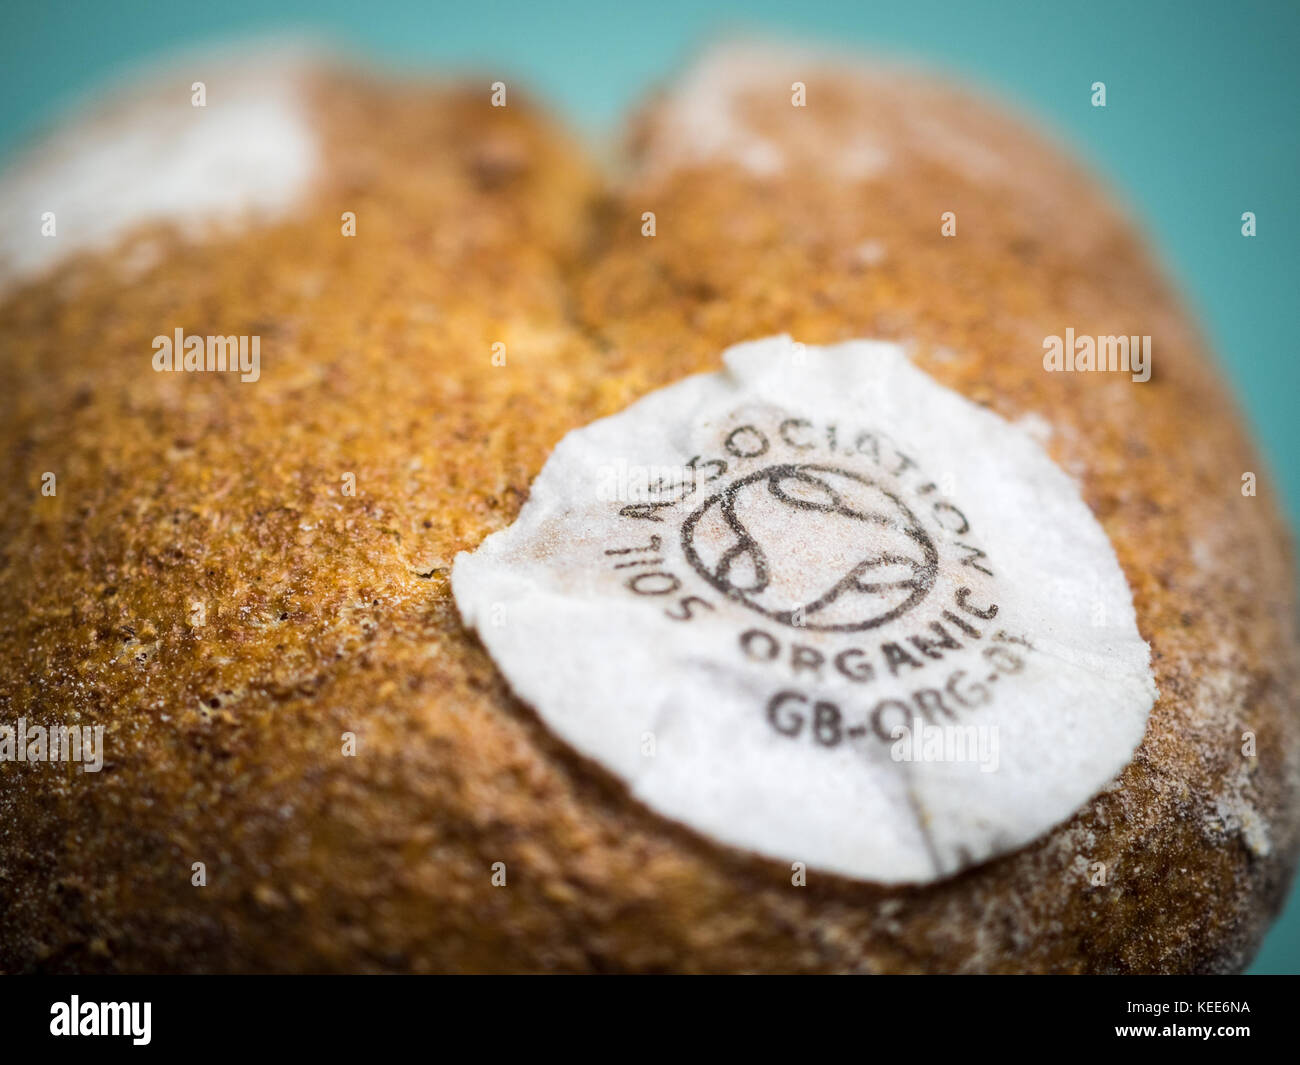 Soil Association Certified / Labelled Organic Bread Stock Photo